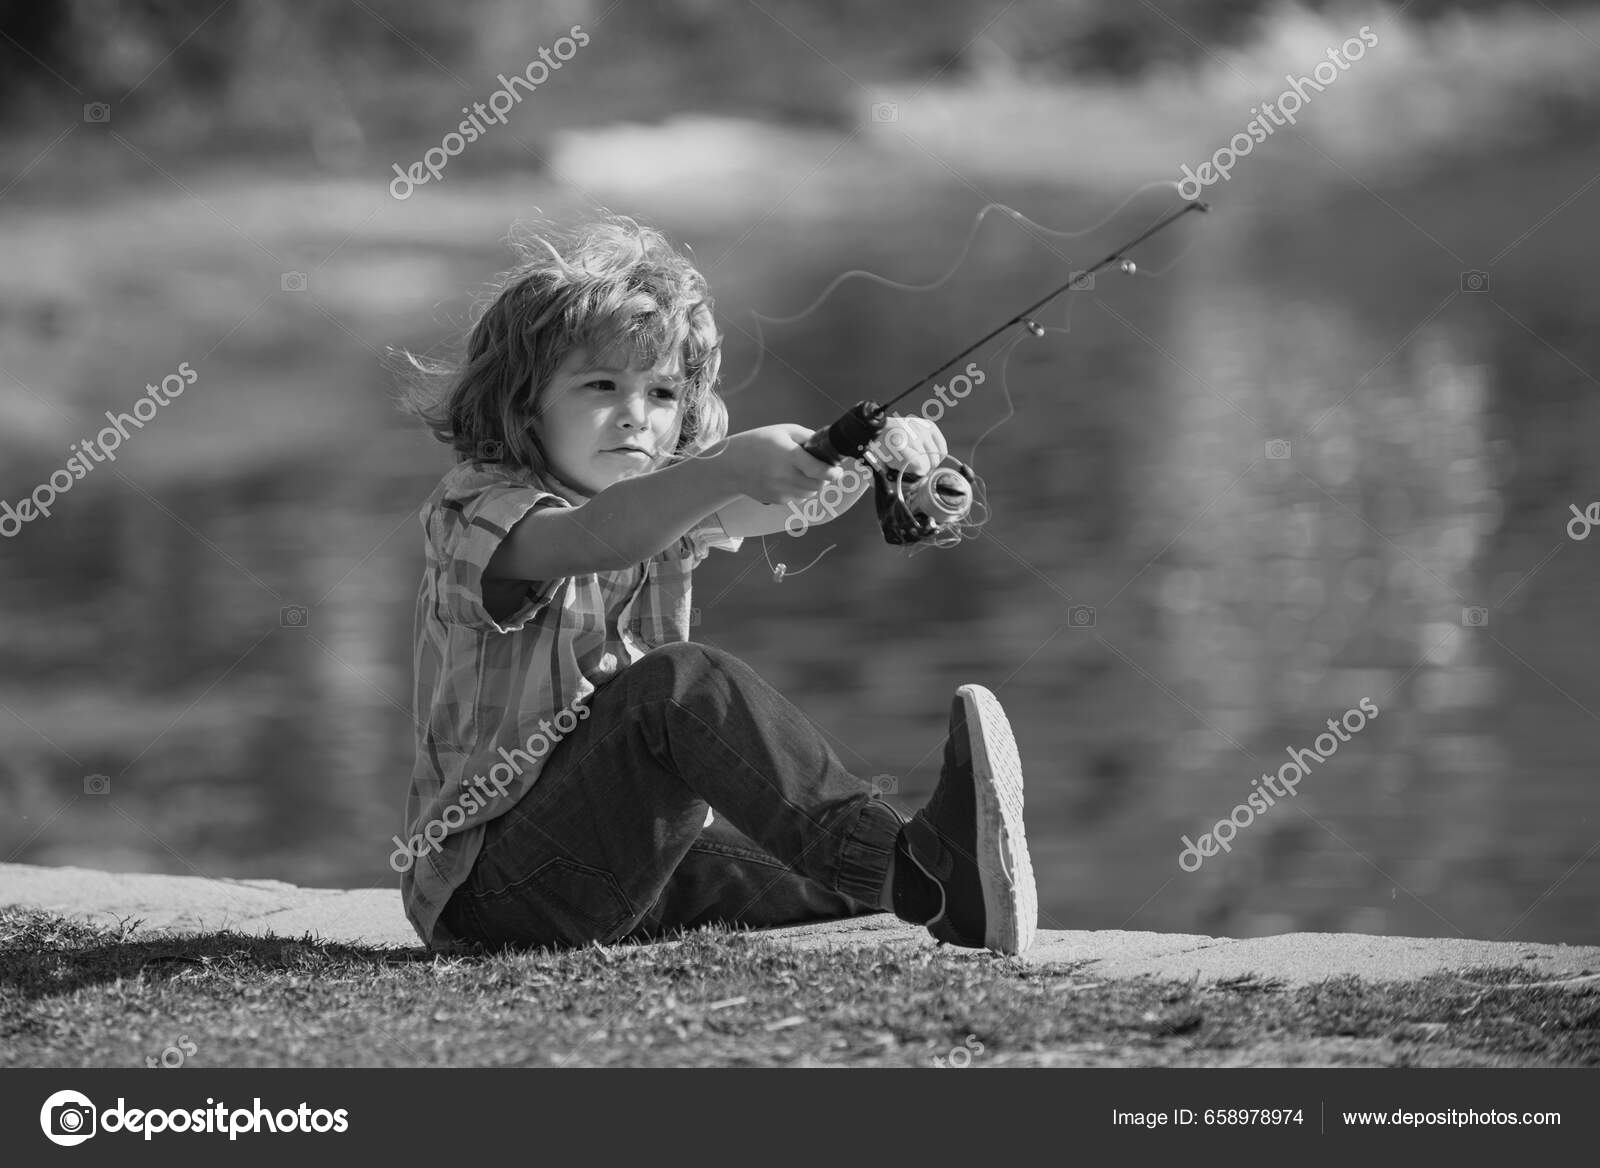 Child Fishing River Lake Young Kid Fisher Summer Outdoor Leisure